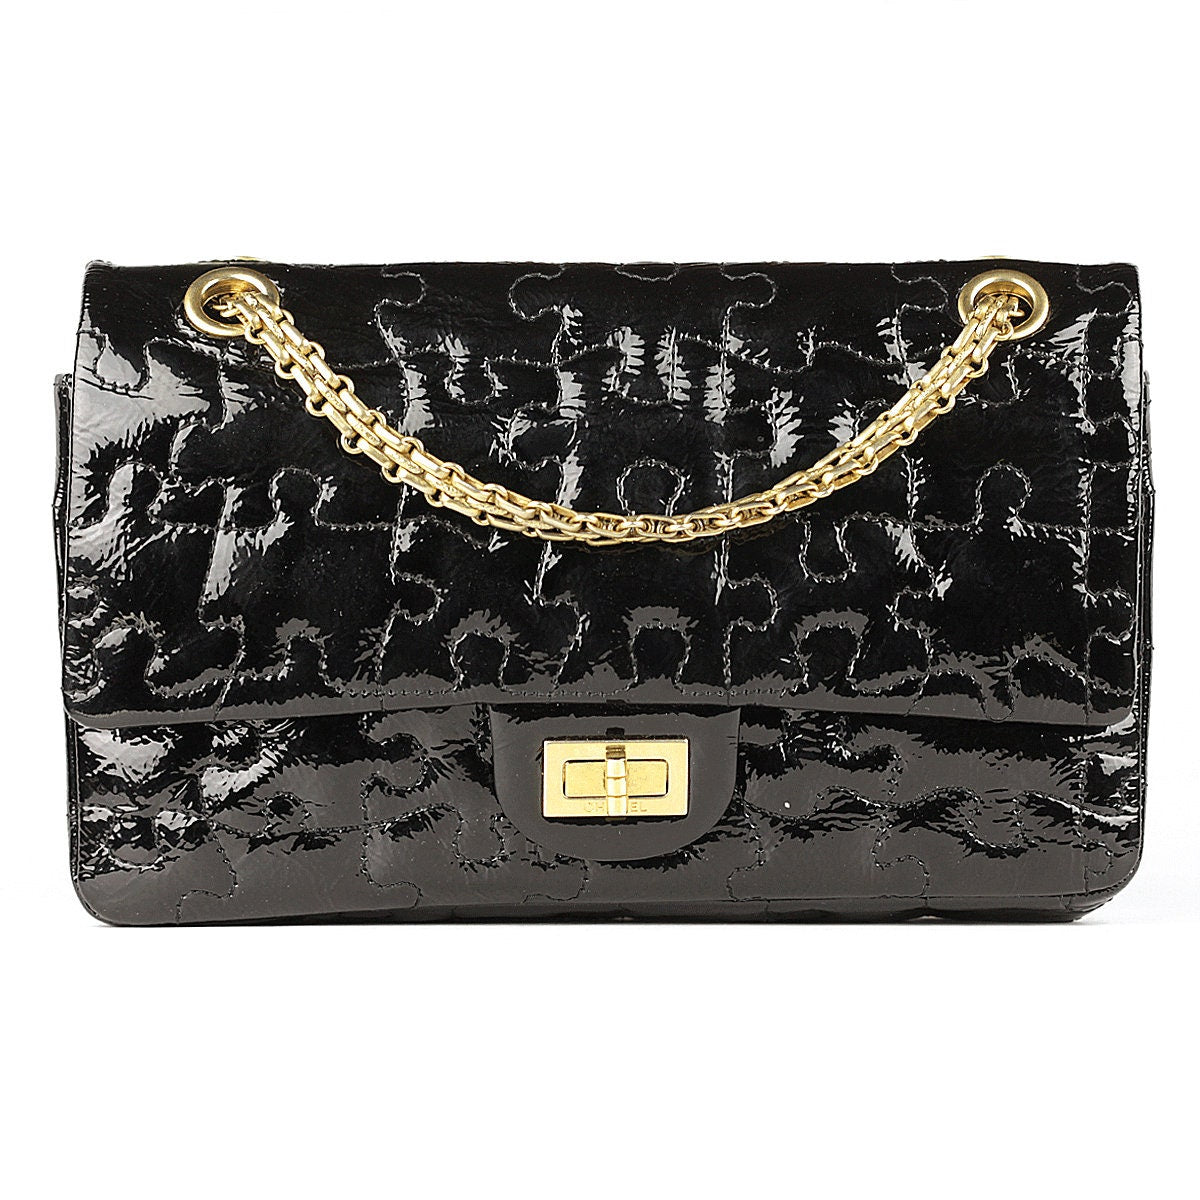 AUTH CHANEL 2.55 225 REISSUE BLACK PATENT LEATHER FLAP BAG GOLD HW 8800+ usd